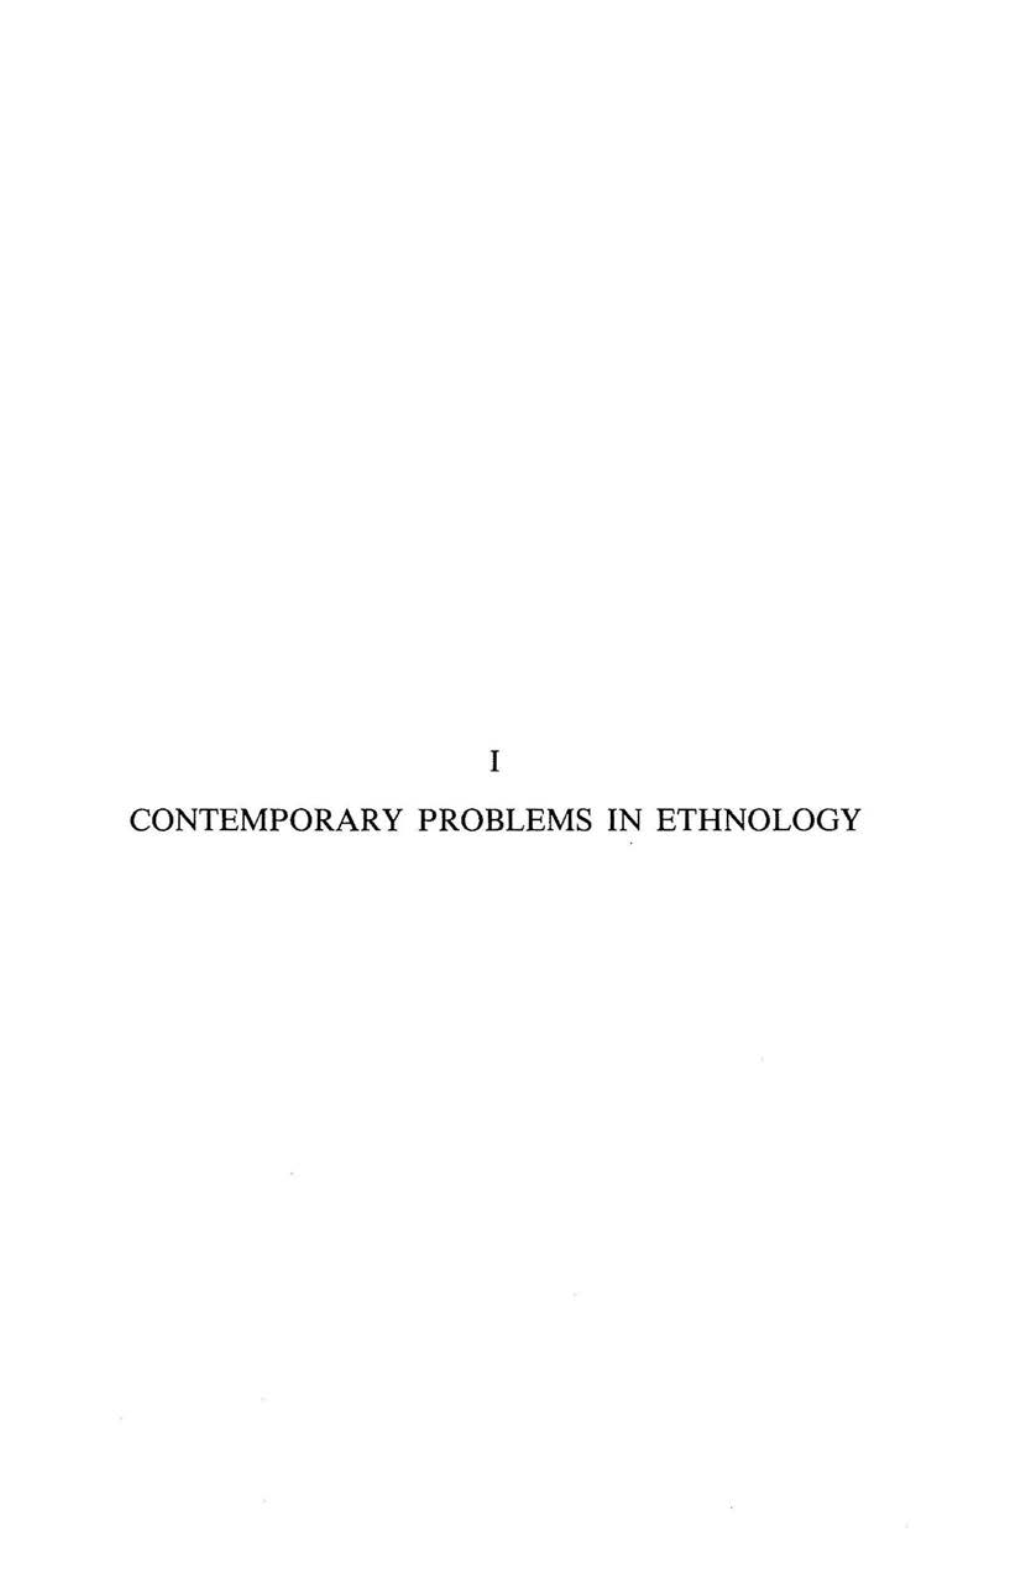 CONTEMPORARY PROBLEMS in ETHNOLOGY SEX ROLE COMPLEMENTARITY by Christine M